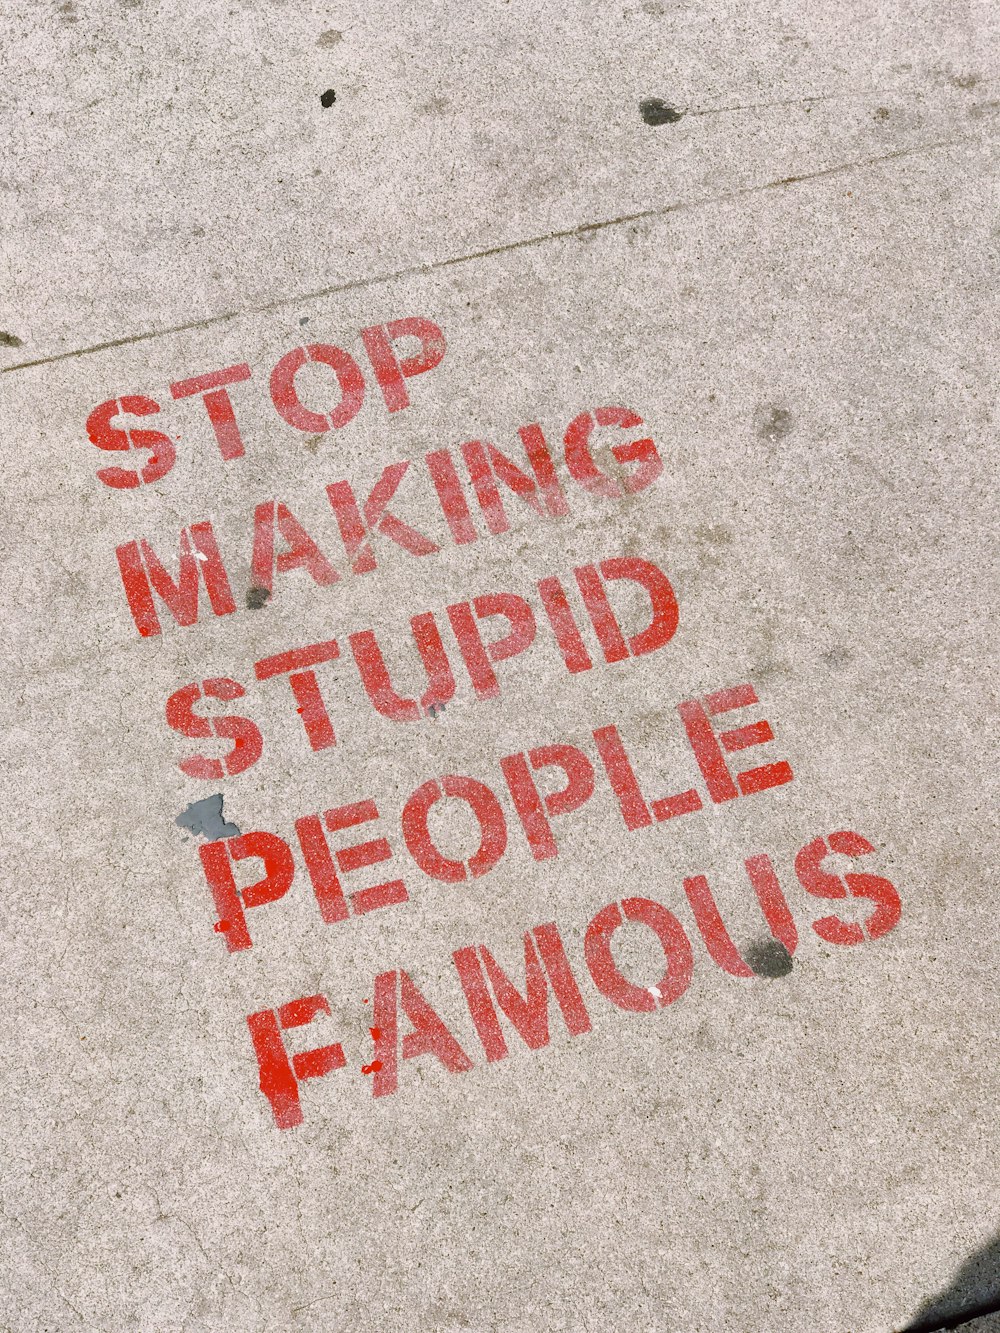 stop making stupid people famous signage